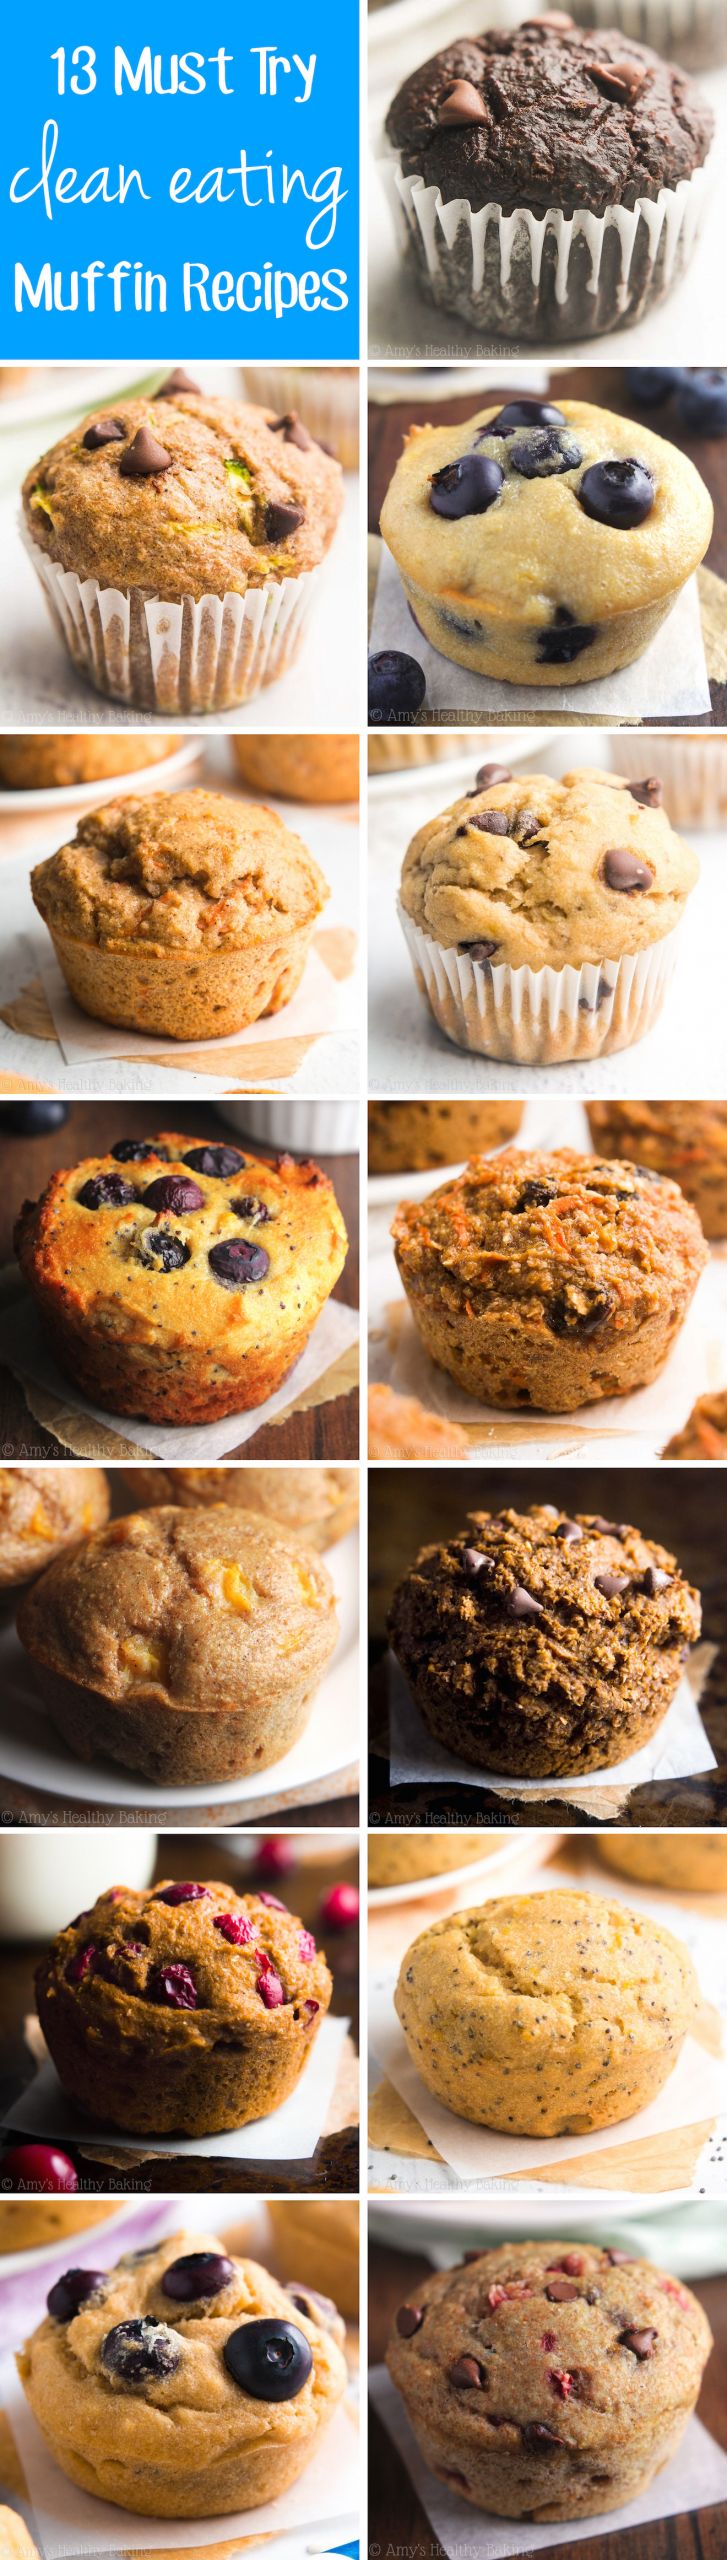 Clean Eating Muffins
 13 More Must Try Clean Eating Muffin Recipes